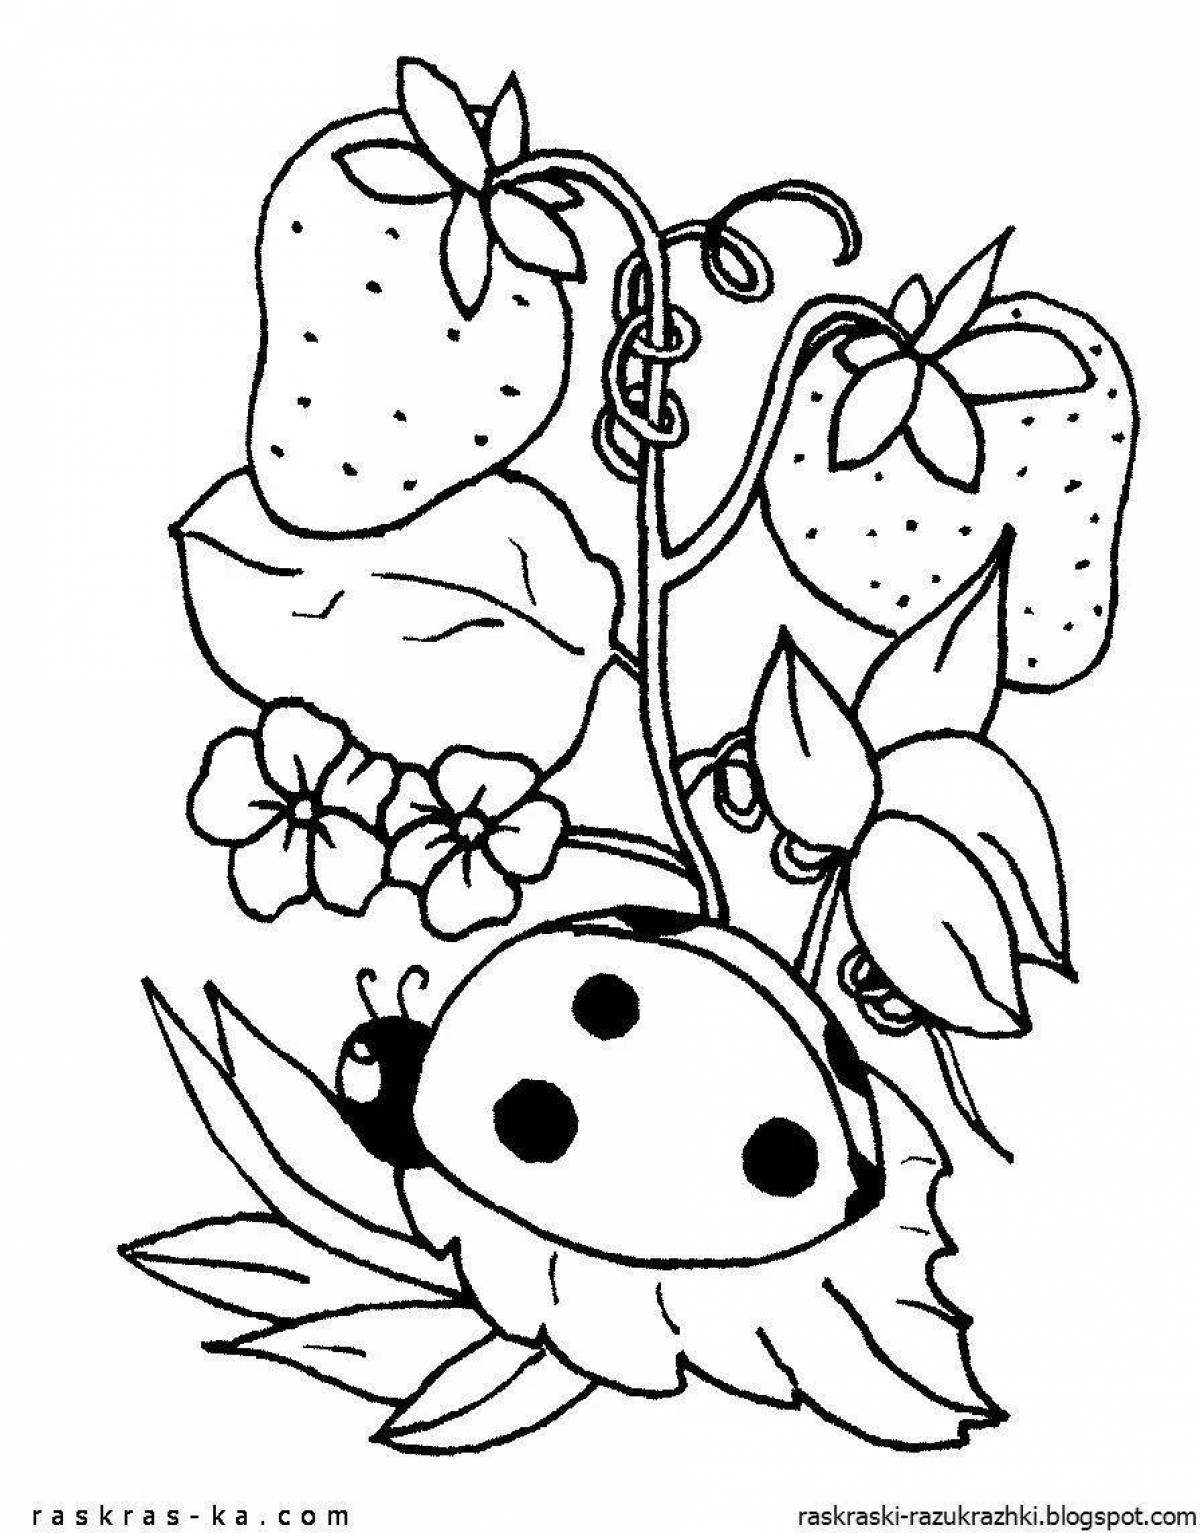 A funny ladybug coloring book for 6-7 year olds